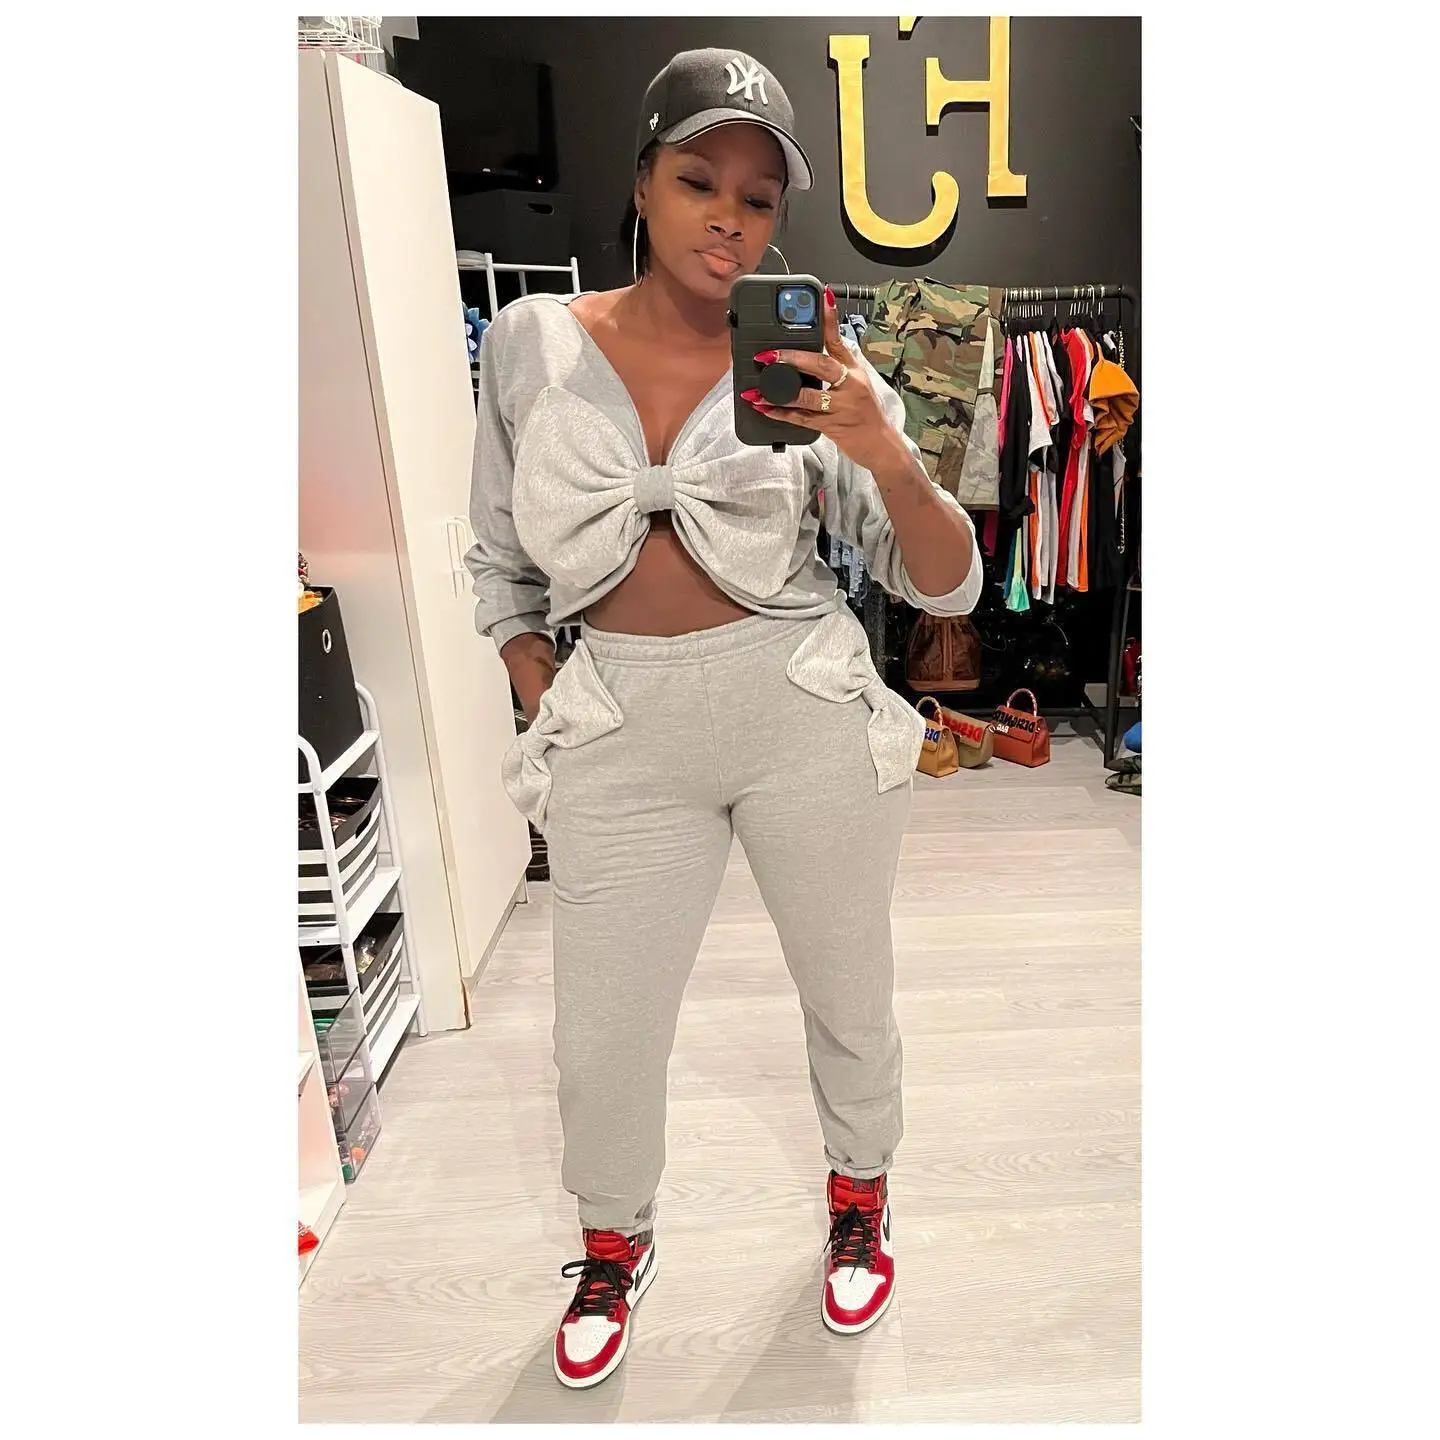 

Active Winter Autumn 2022 Two 2 Piece Set for Women Outfit Butterfly Bowknot Crop Top and Butteffly Pants Suit Tracksuit